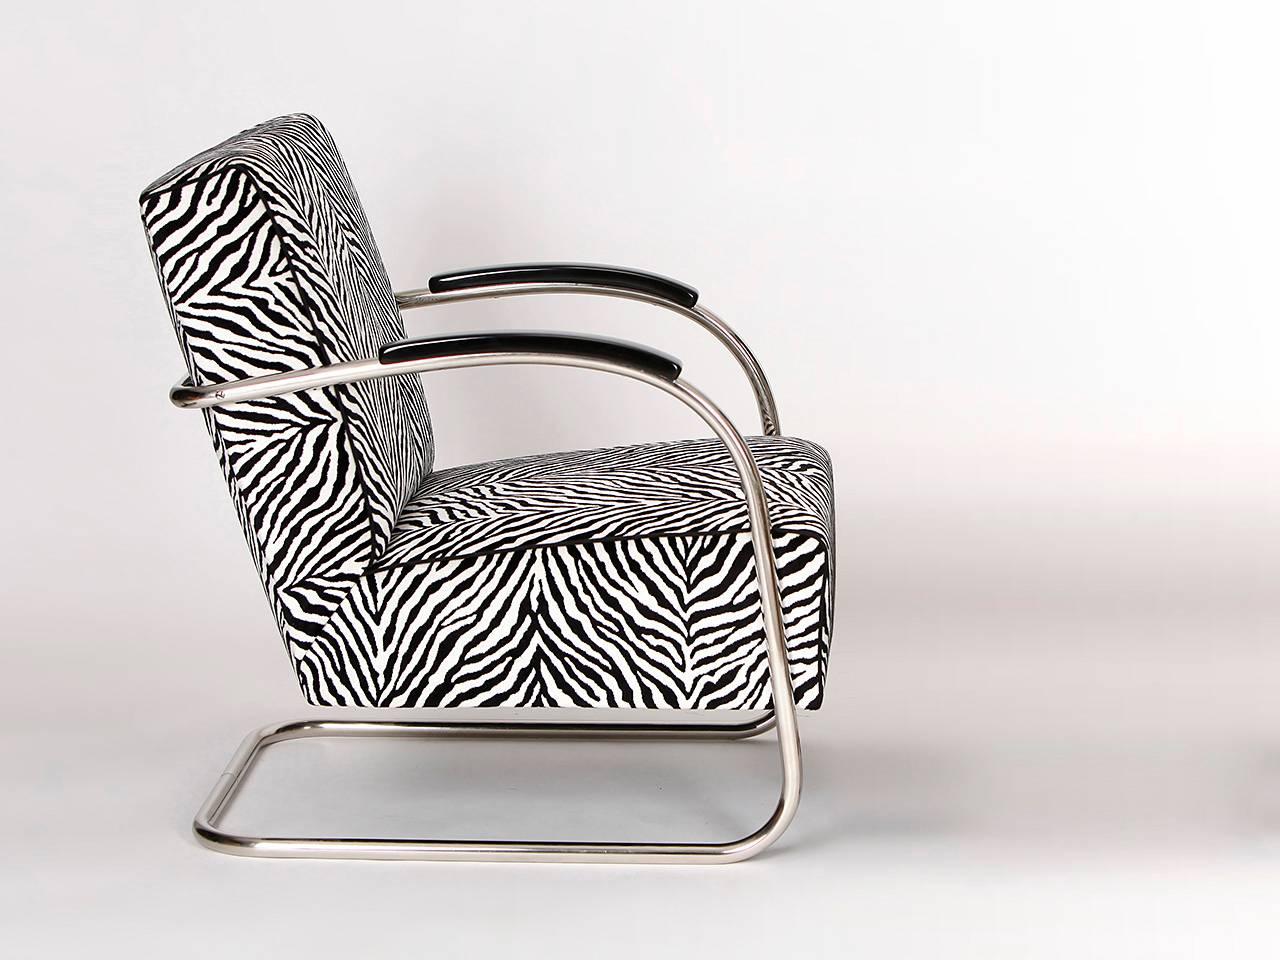 Armchairs with tubular steel frames from the 1930s. Manufactured by Mücke & Melder, Frystat in former Czechoslovakia. Completely restored with new springs. Armrests have a black lacquered finish. Reupholstered in Zebra print by English fabric